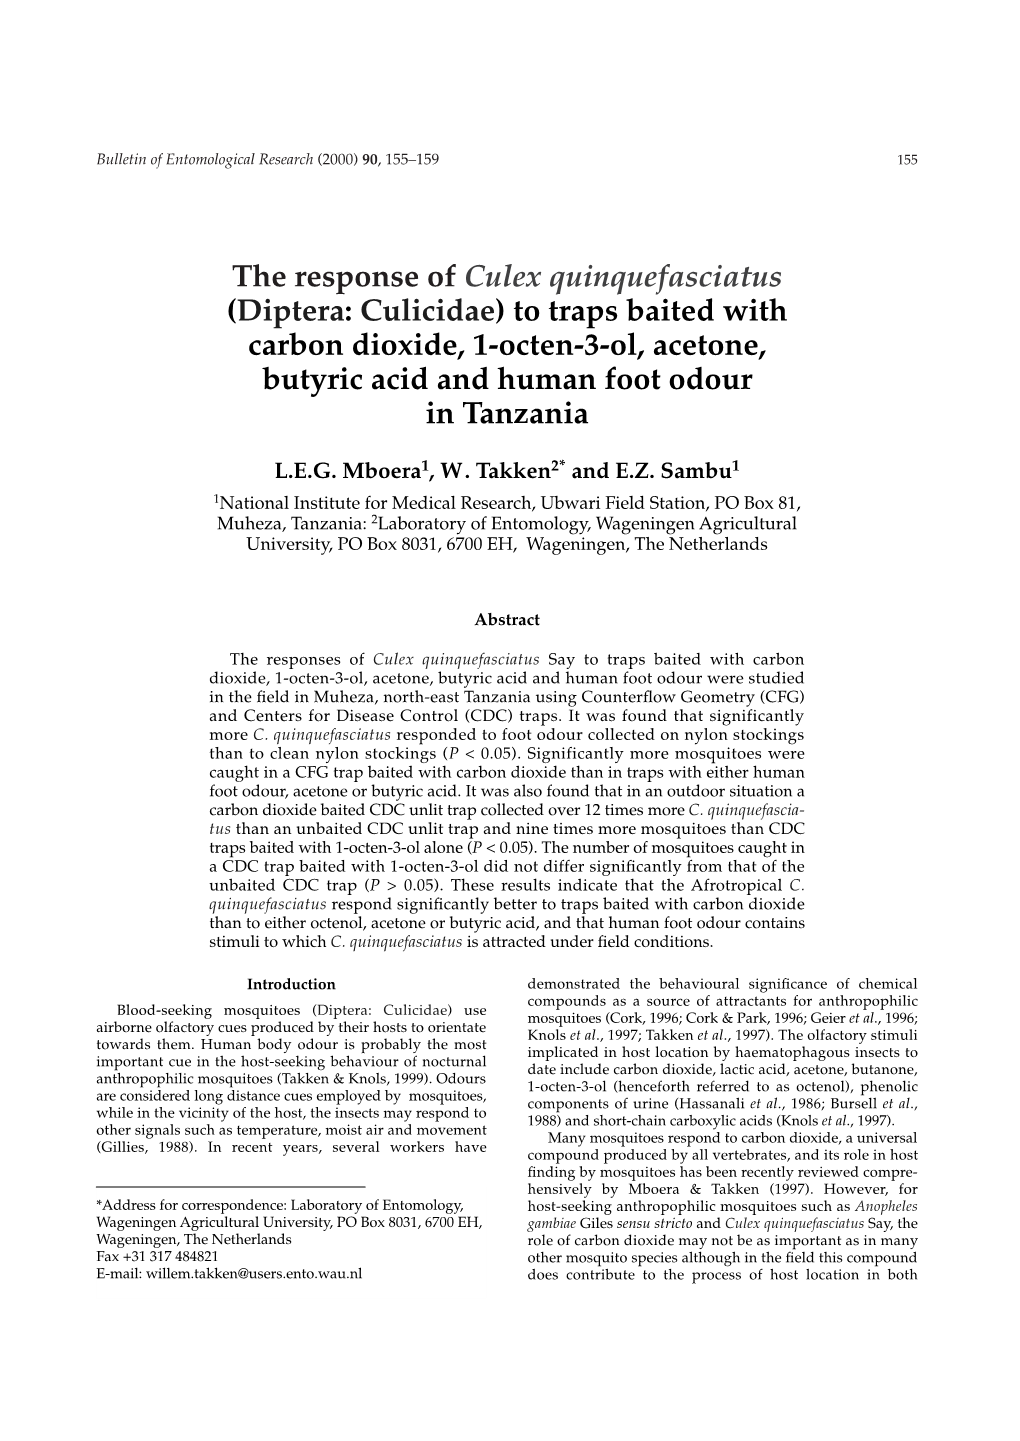 The Response of Culex Quinquefasciatus (Diptera: Culicidae) to Traps Baited with Carbon Dioxide, 1-Octen-3-Ol, Acetone, Butyric Acid and Human Foot Odour in Tanzania